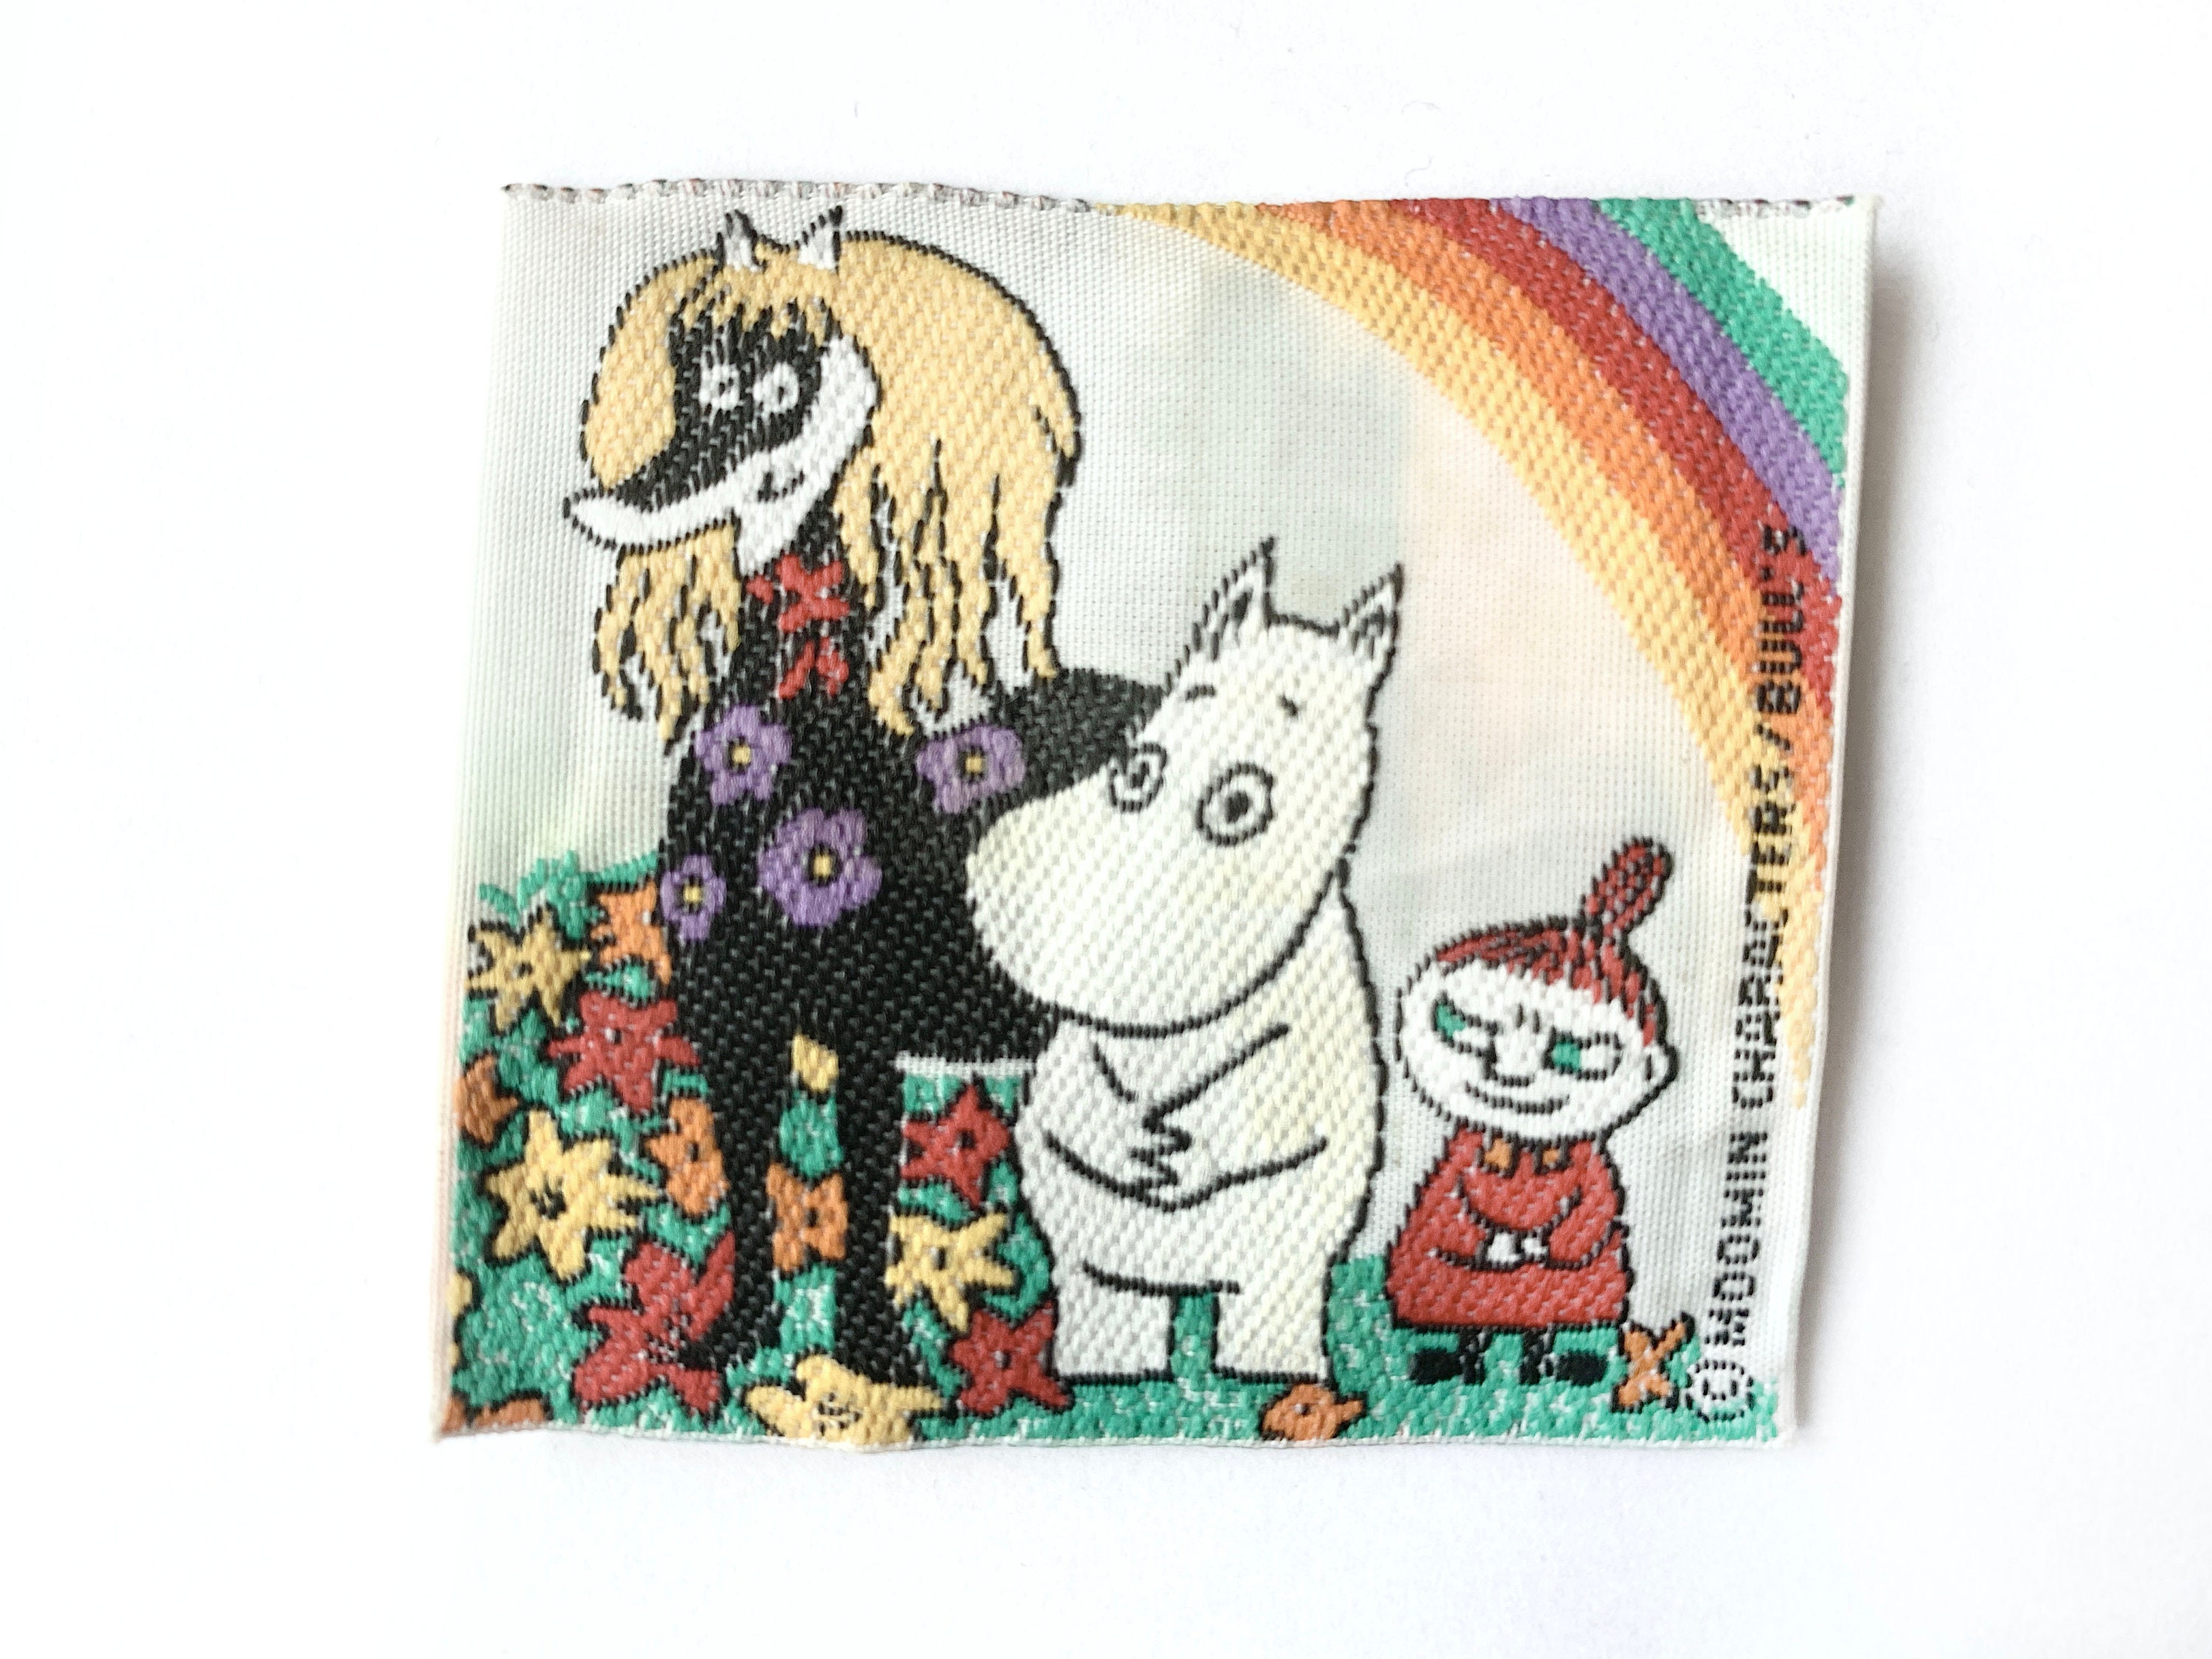 Special Spring Moments from Moominvalley I Moomin 90s I